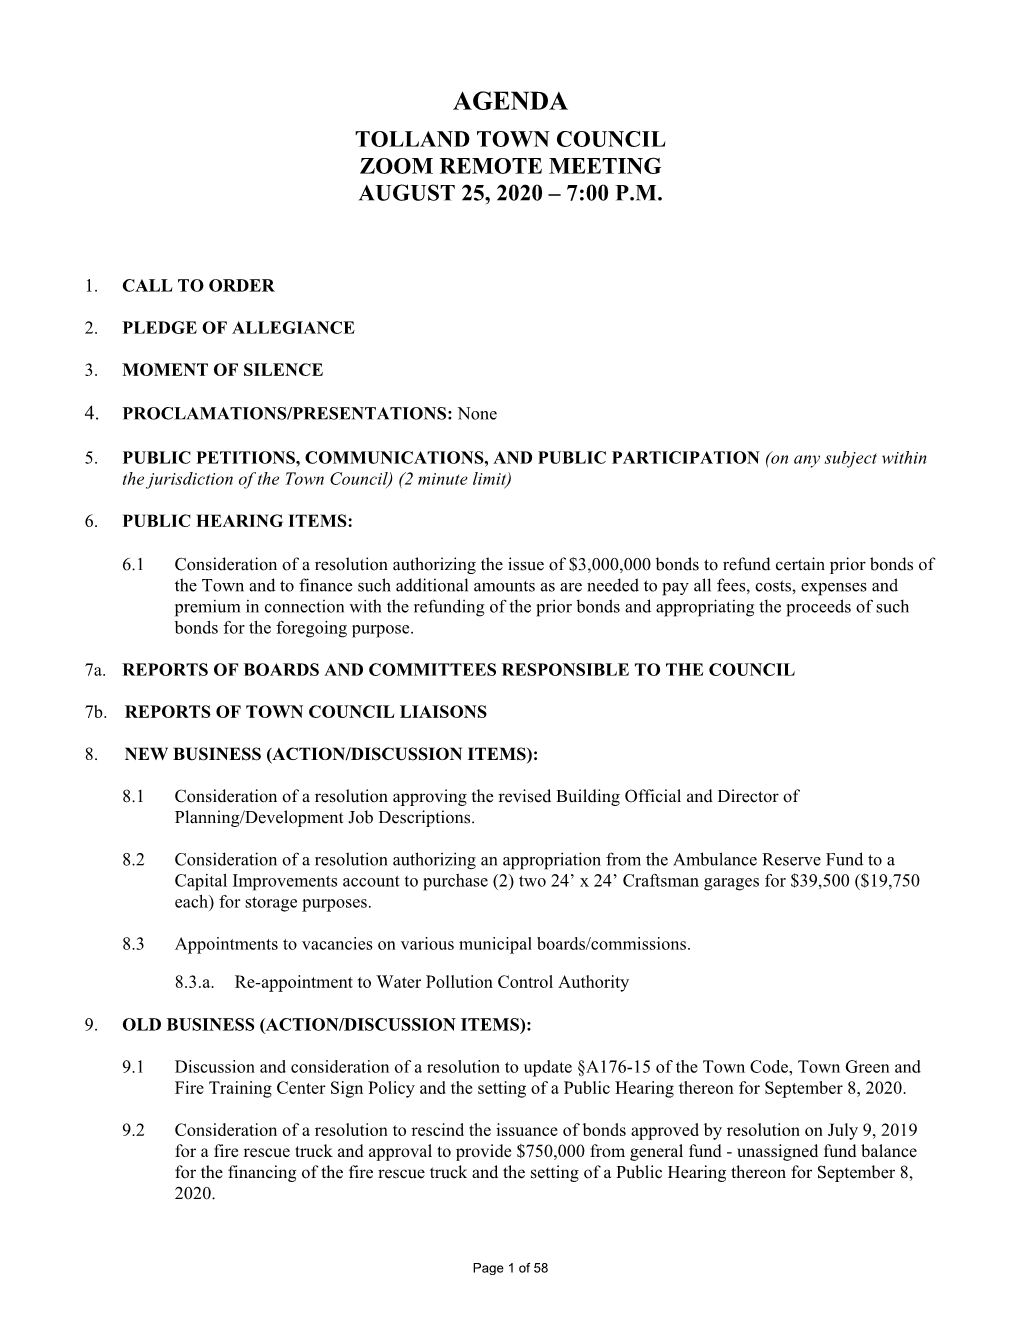 August 25, 2020 Remote Council Meeting Packet